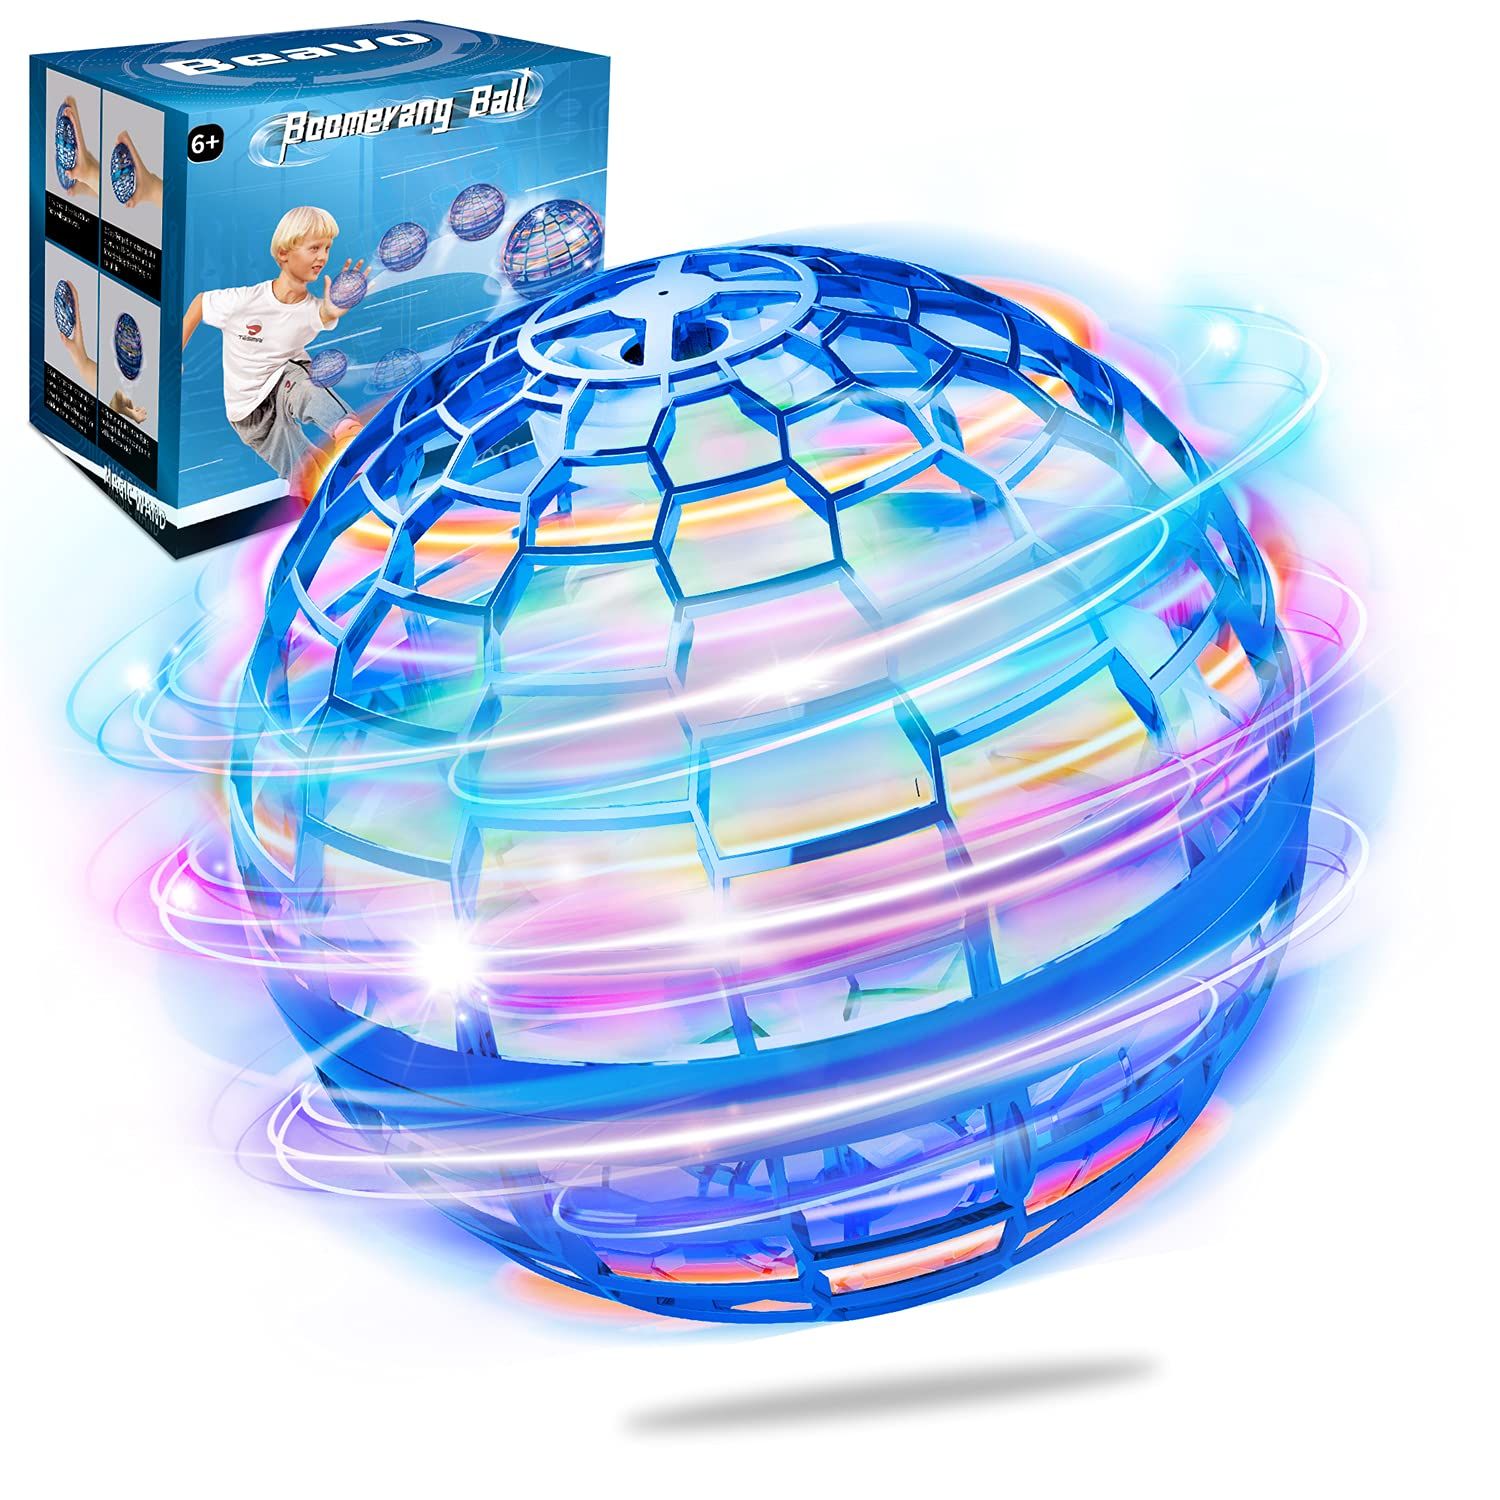  Flying Orb Ball Toy,360°Rotating Hand Controlled Flying Space  Ball,Flying Spinner Mini Drone for Boys Girls Teens Indoor Outdoor  Toys,Hover Ball for Christmas Birthday Gifts,Hot Toys for 2023(Blue) : Toys  & Games